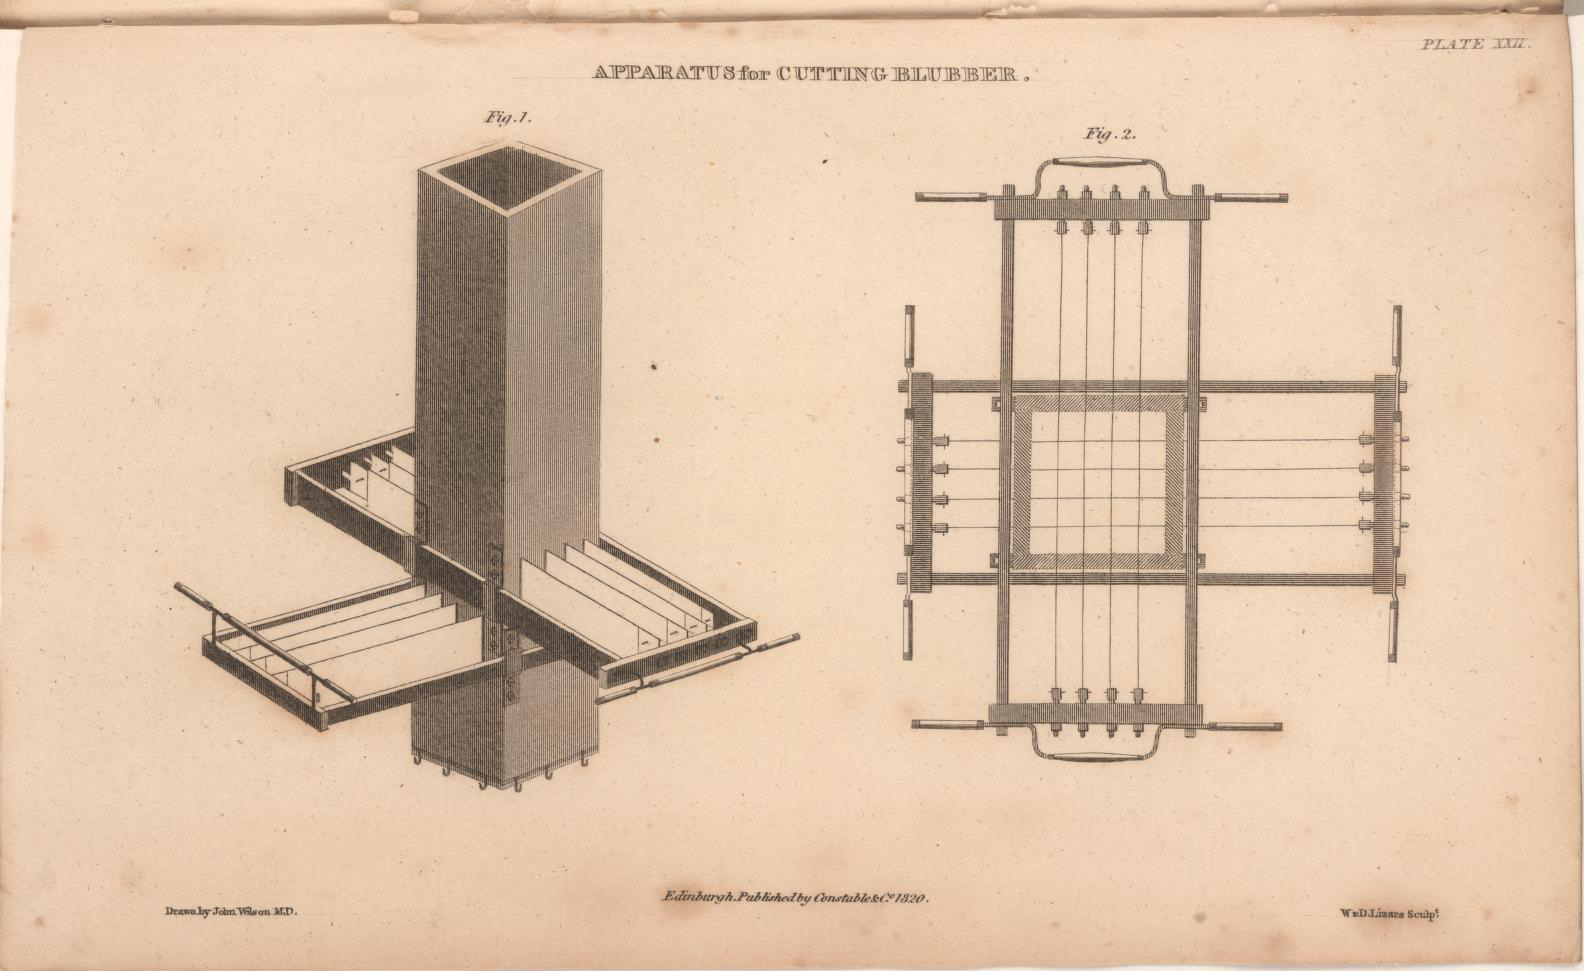 Apparatus for Cutting Blubber